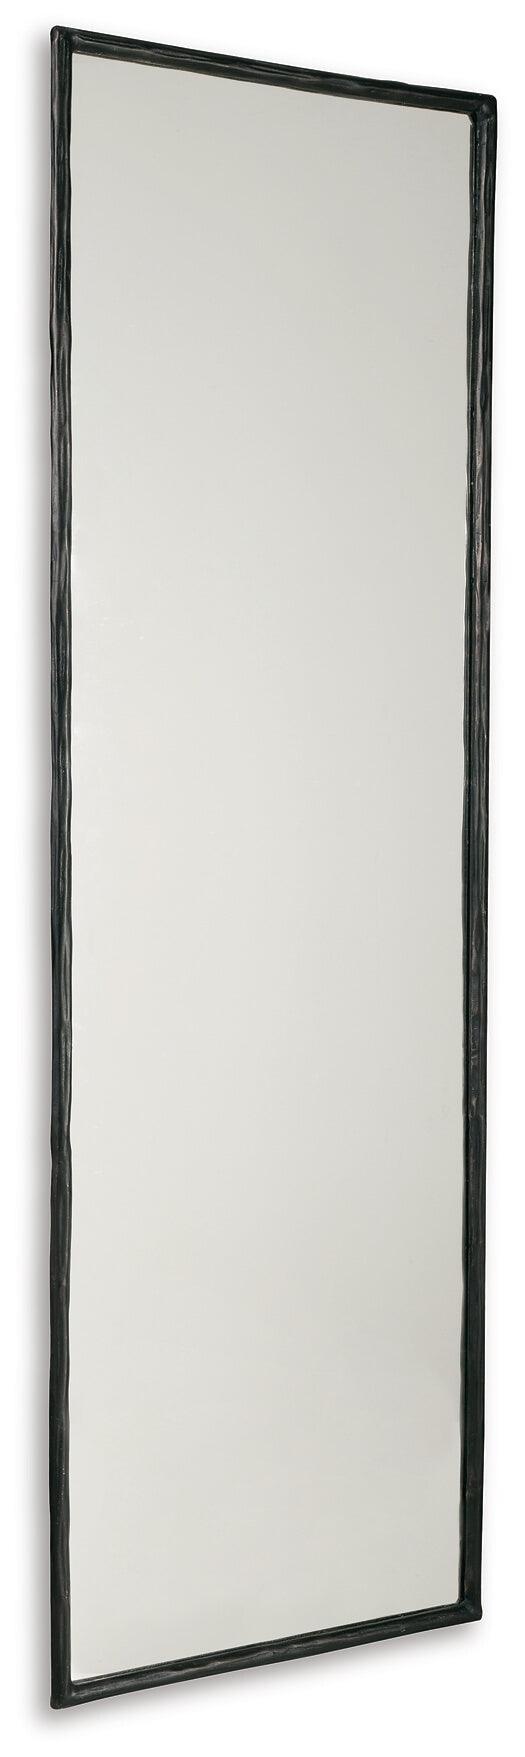 Ryandale Floor Mirror A8010263 Metallic Contemporary Decorative Oversize Accents By AFI - sofafair.com